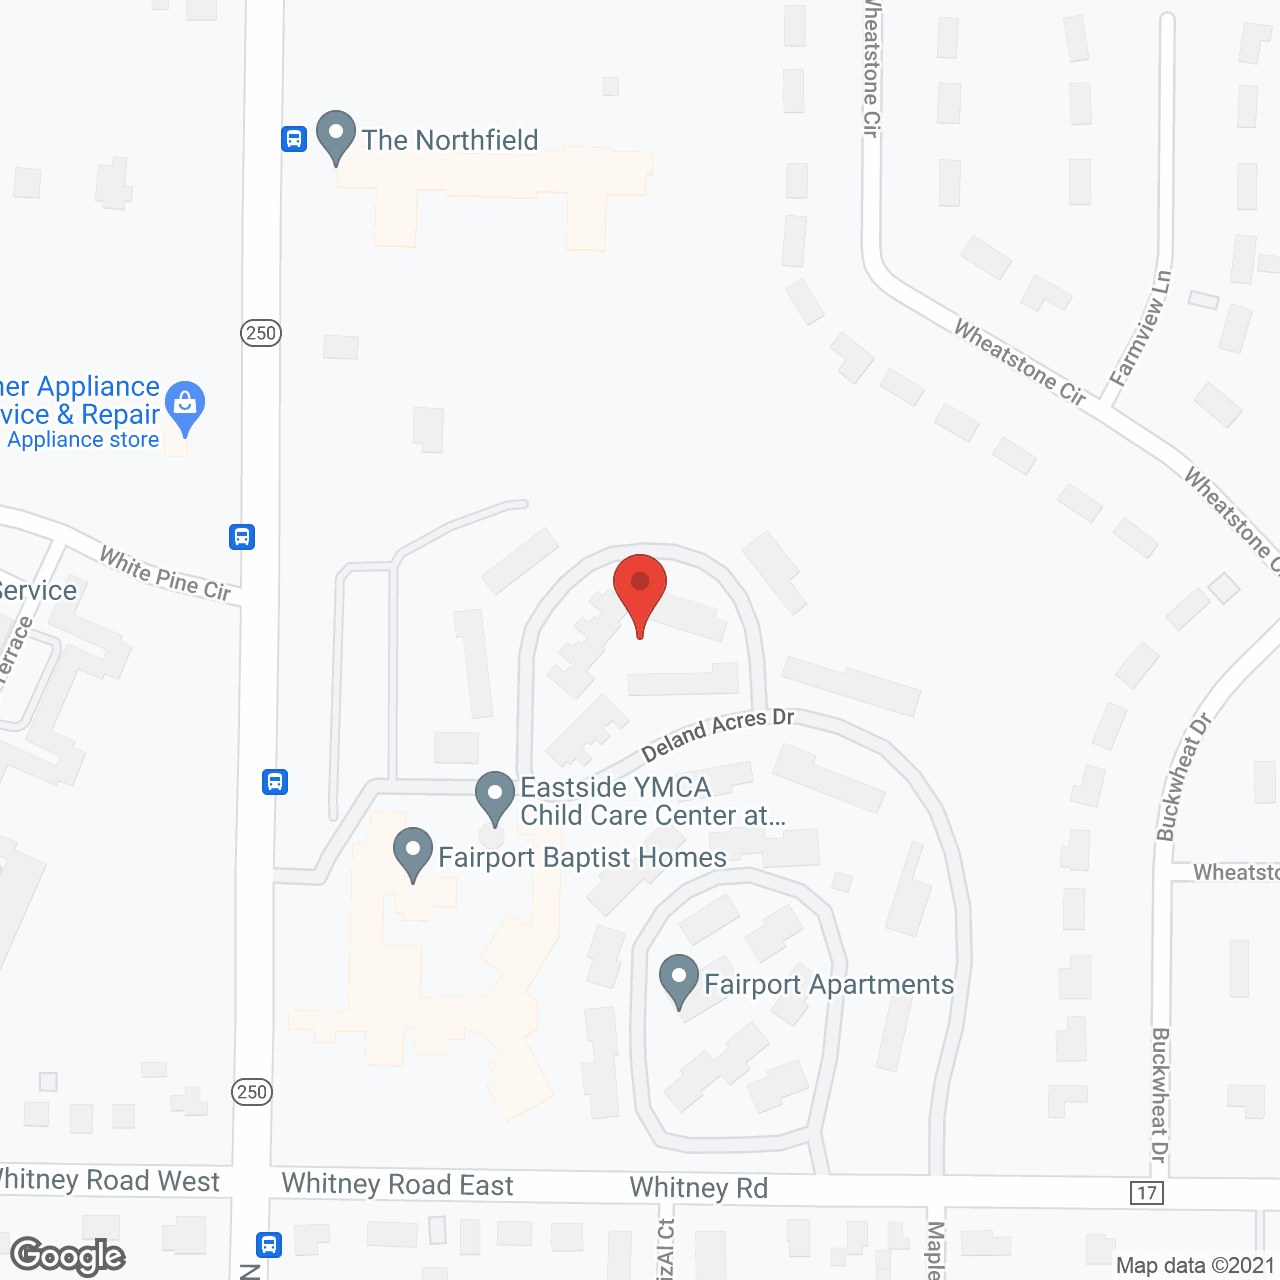 Assisted Living at Fairport Baptist Homes in google map